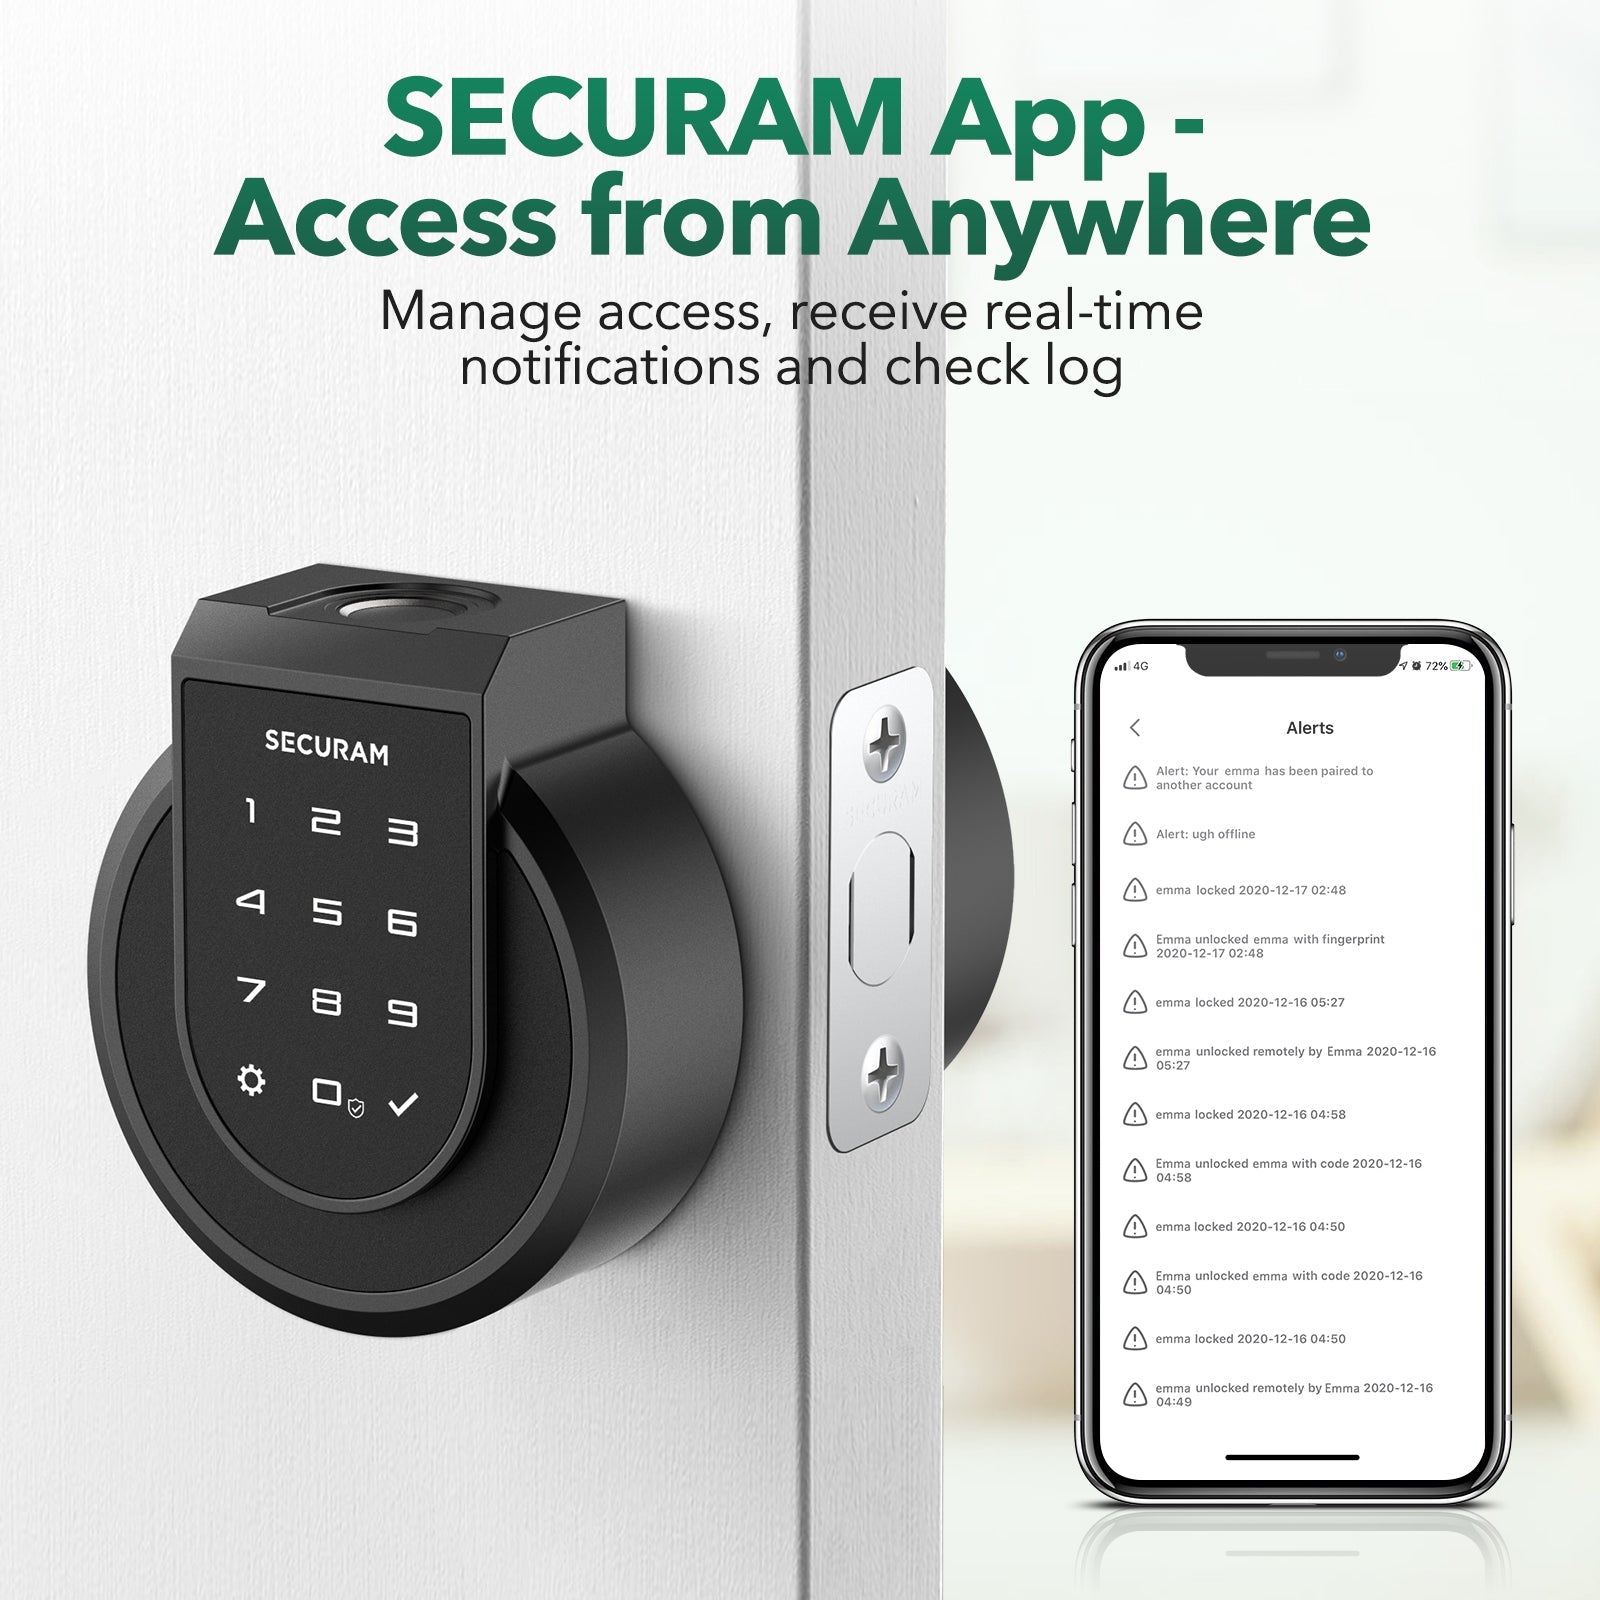 SECURAM app - access from anywhere.